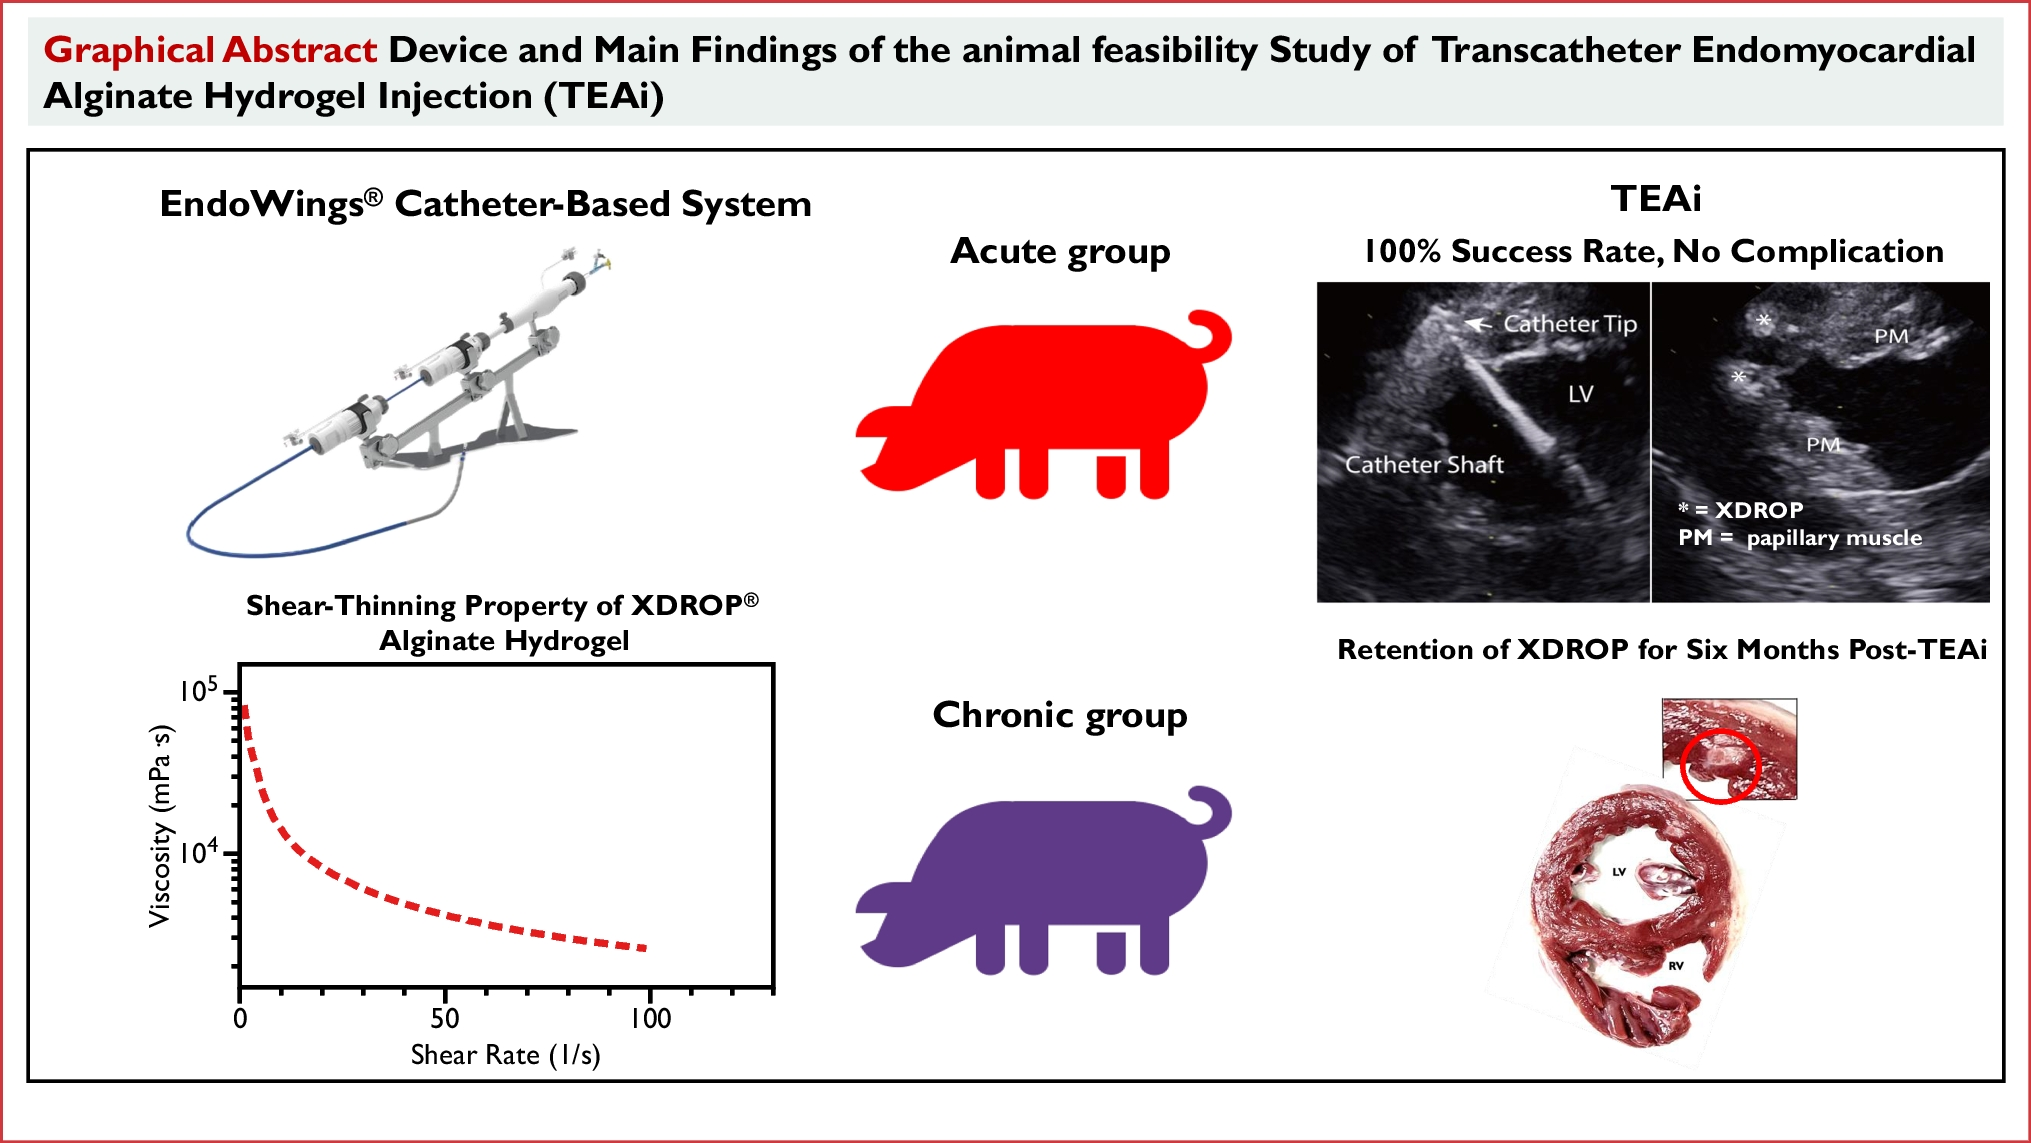 Percutaneous Alginate Hydrogel Endomyocardial Injection with a Novel Dedicated Catheter Delivery System: An Animal Feasibility Study